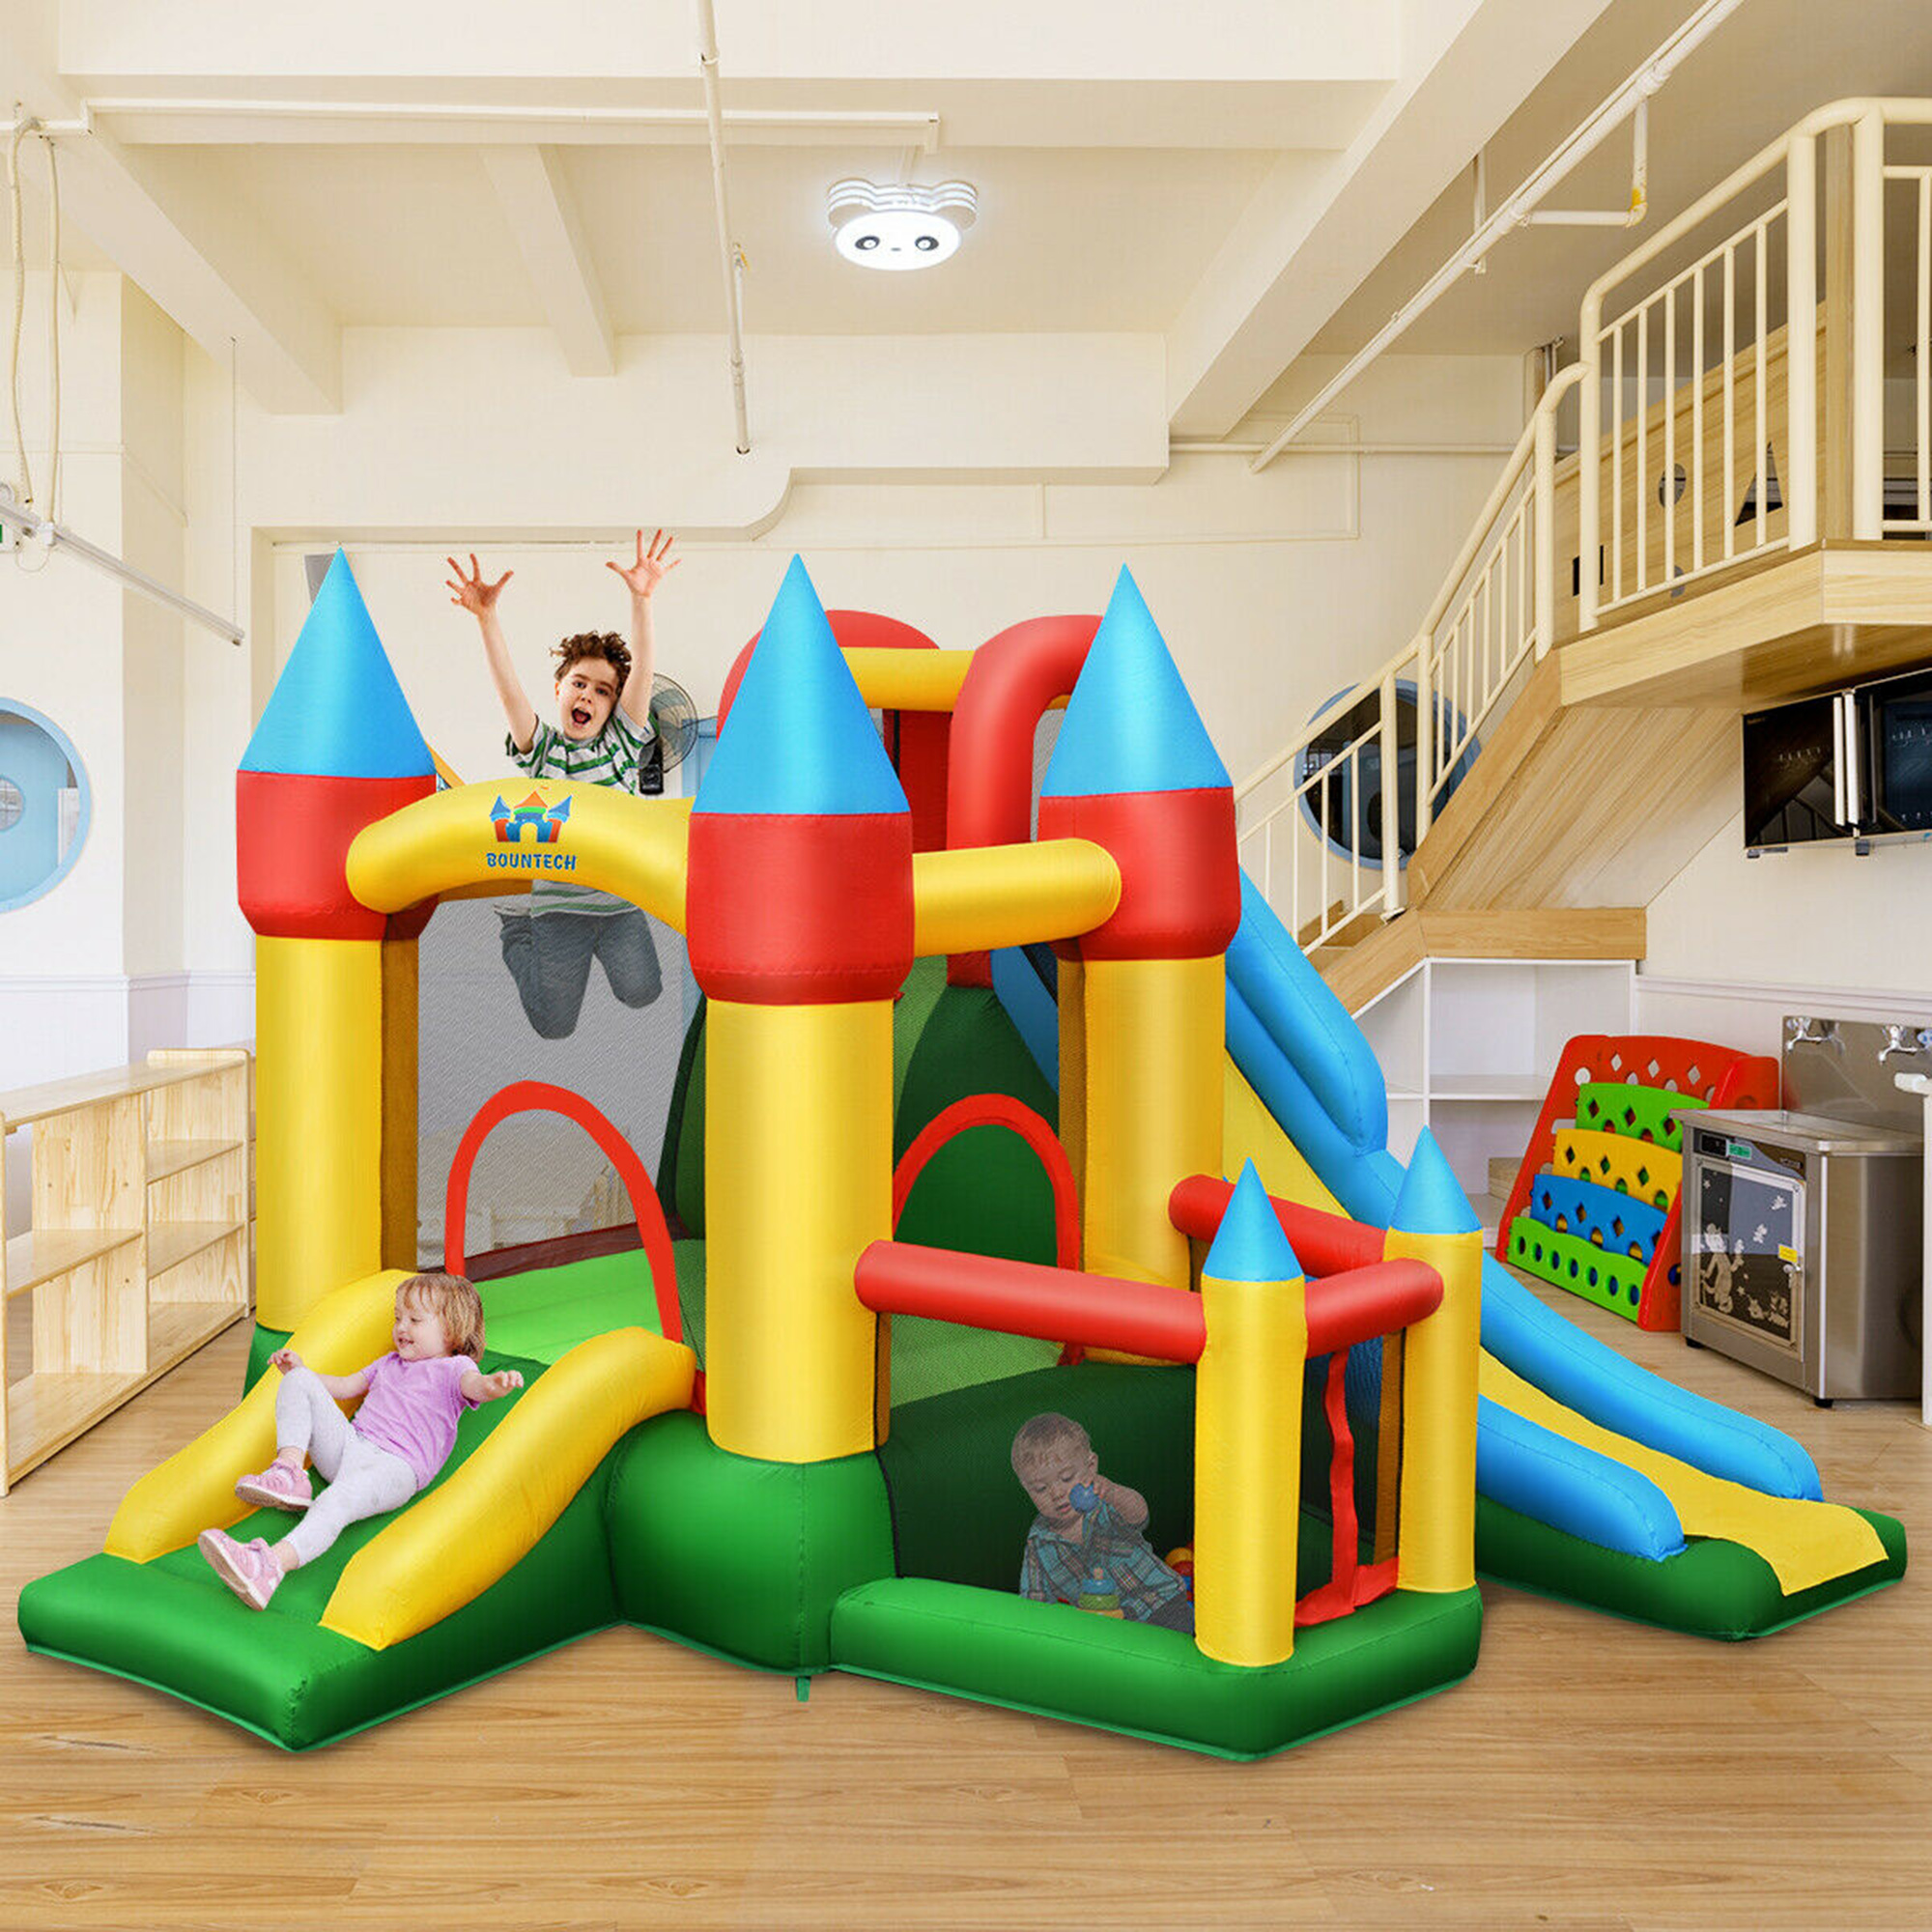 Gymax Kids Inflatable Bounce House Jumping Dual Slide Bouncer Castle W/ 780W Blower - image 3 of 10